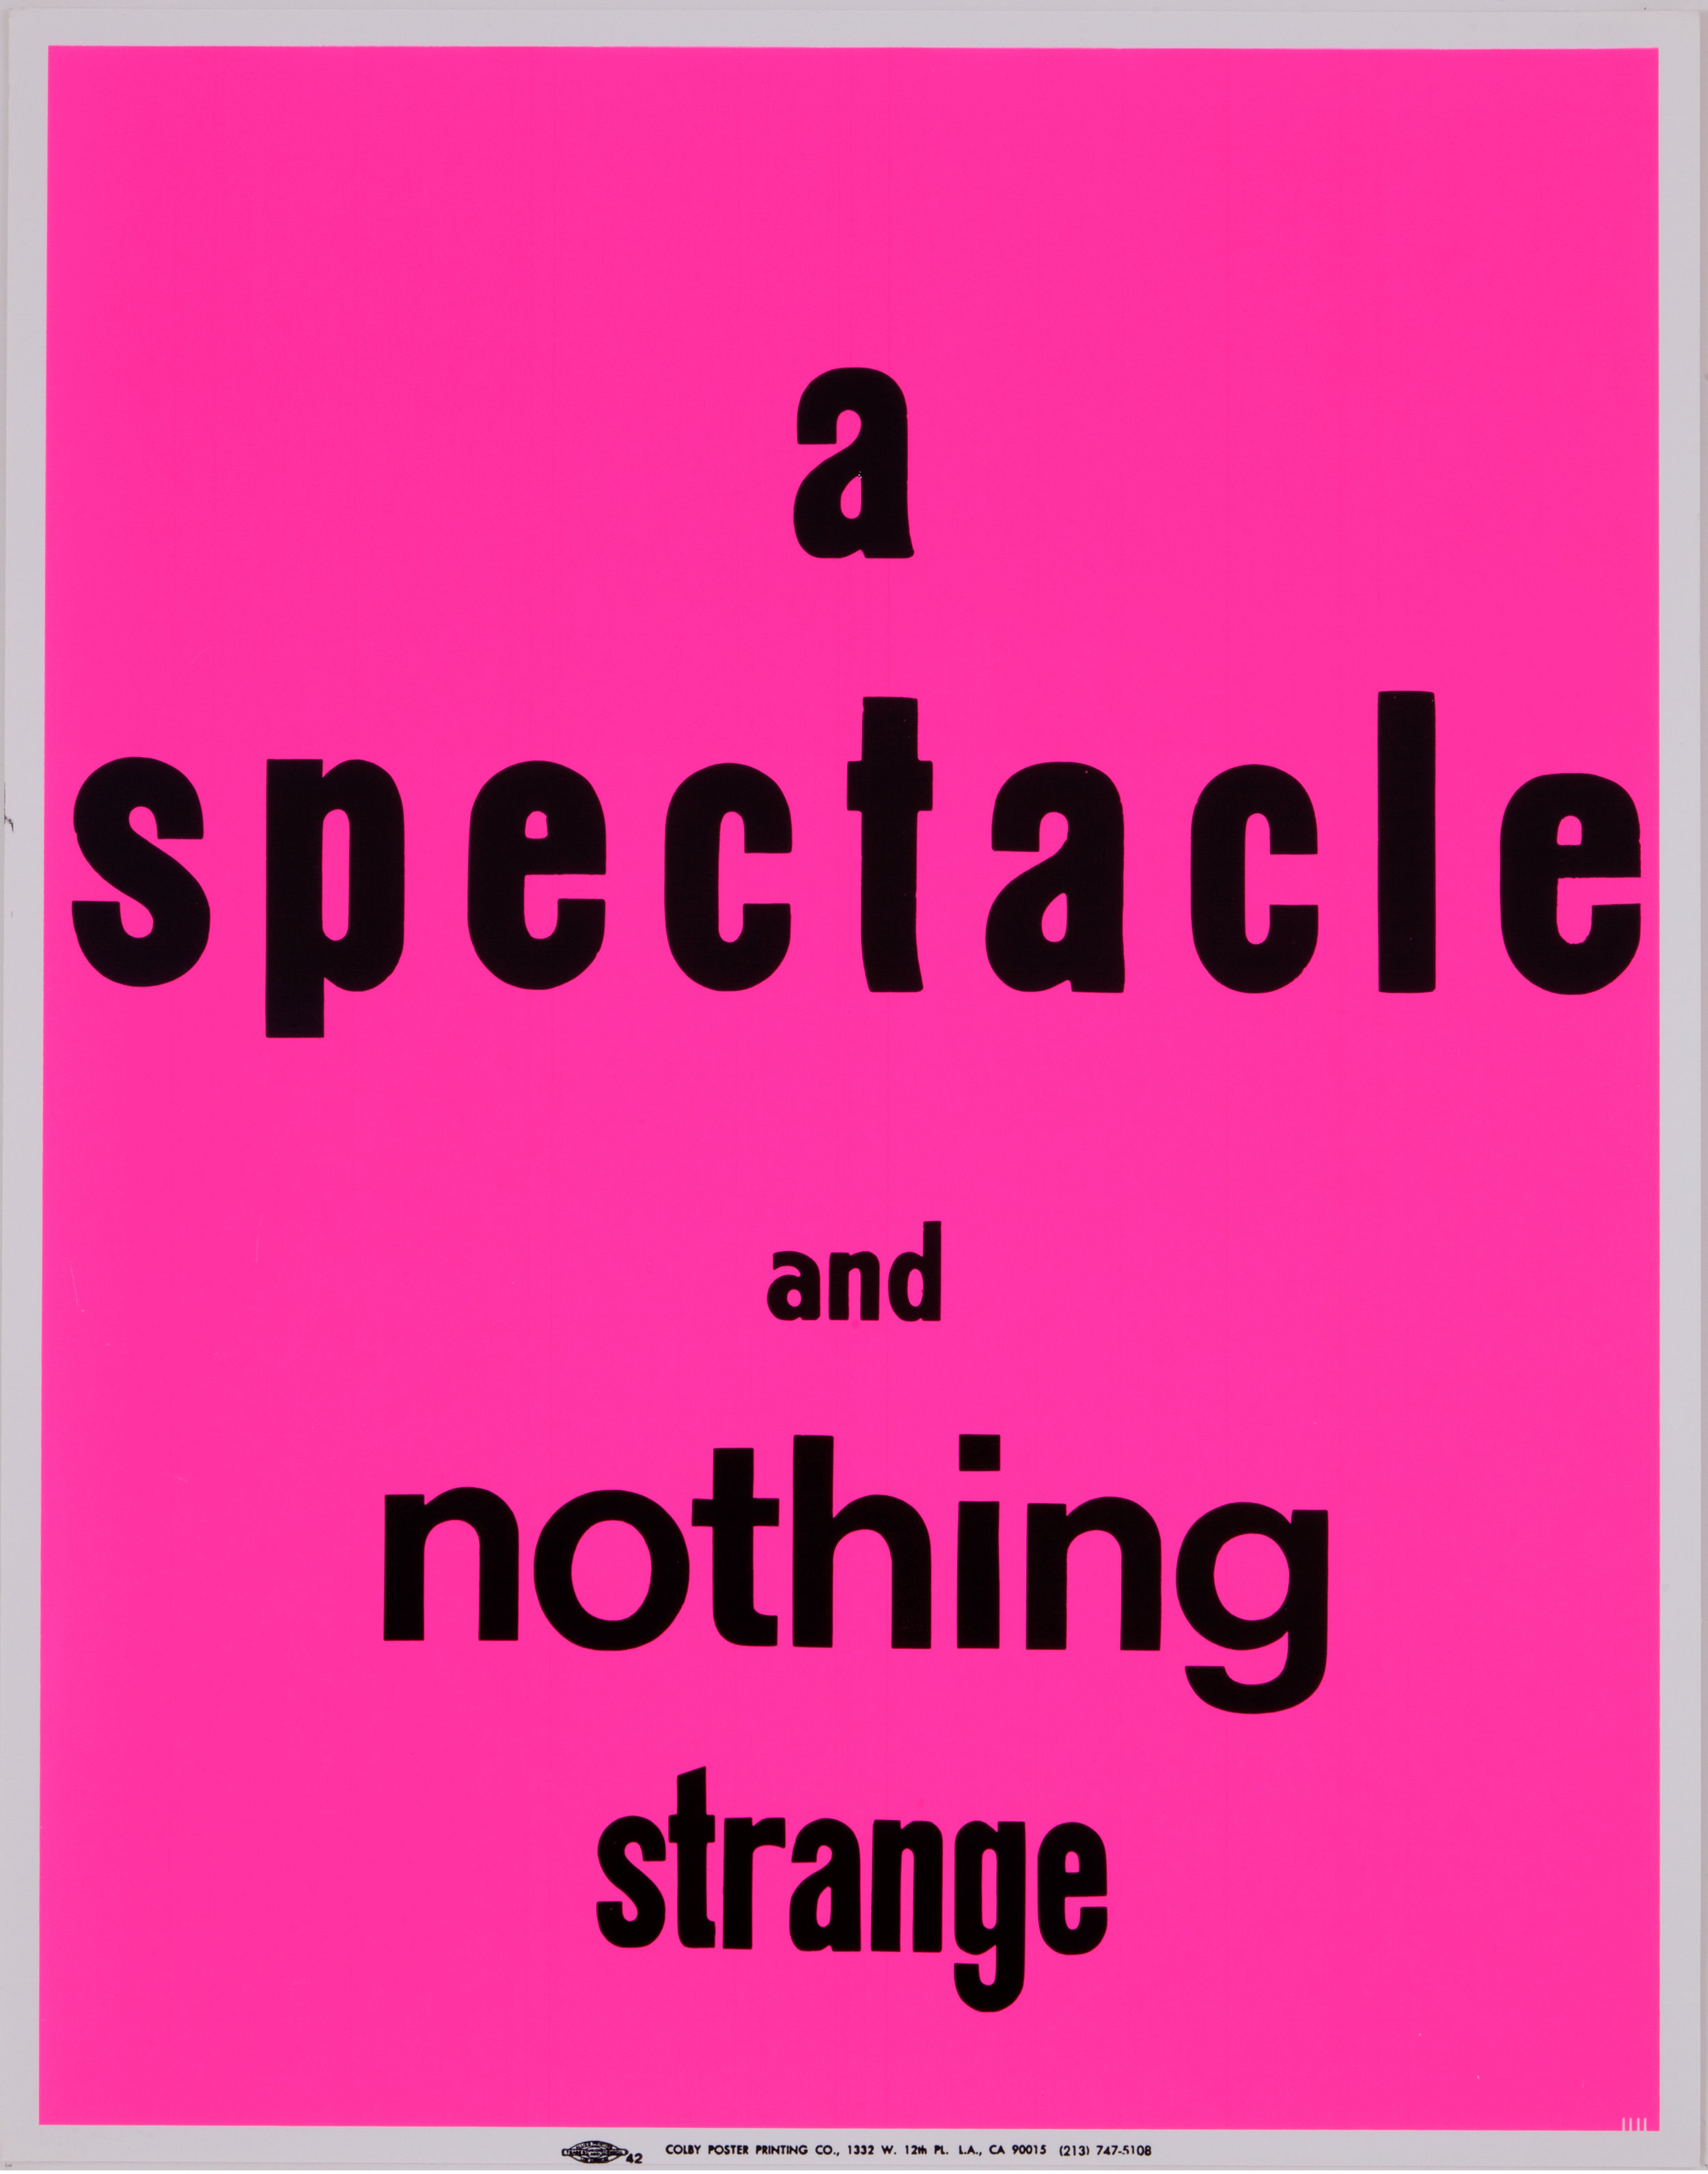  Eve Fowler,  a spectacle and nothing strange , from  a spectacle and nothing strange , 2011–12, a series of screen print posters, 28” x 22”. Courtesy of the artist.  